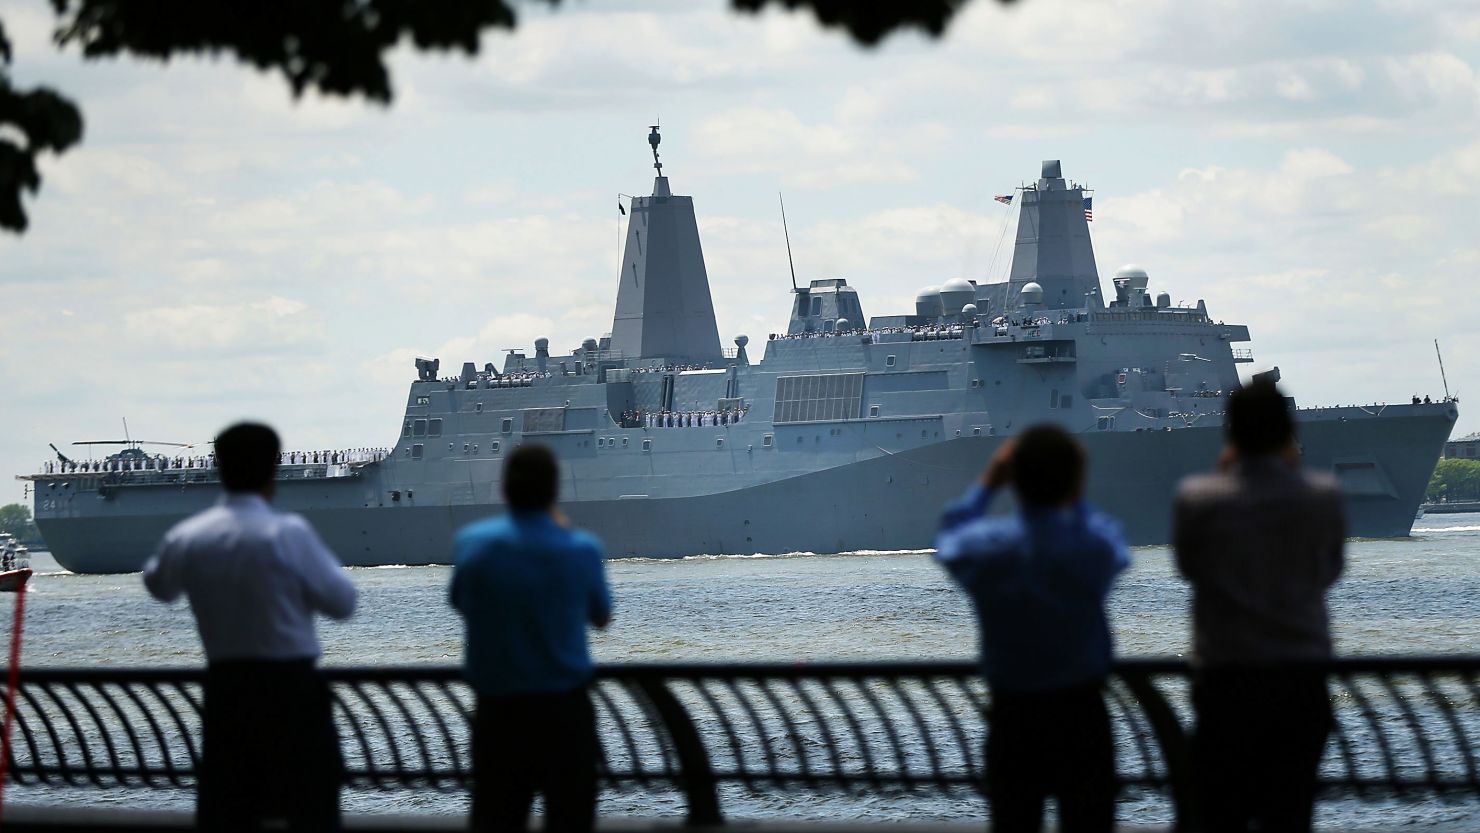 The Norfolk-based USS Arlington joins the Parade of Ships as it makes its way past the Statue of Liberty on the opening day of Fleet Week on May 23, 2018 in New York City.